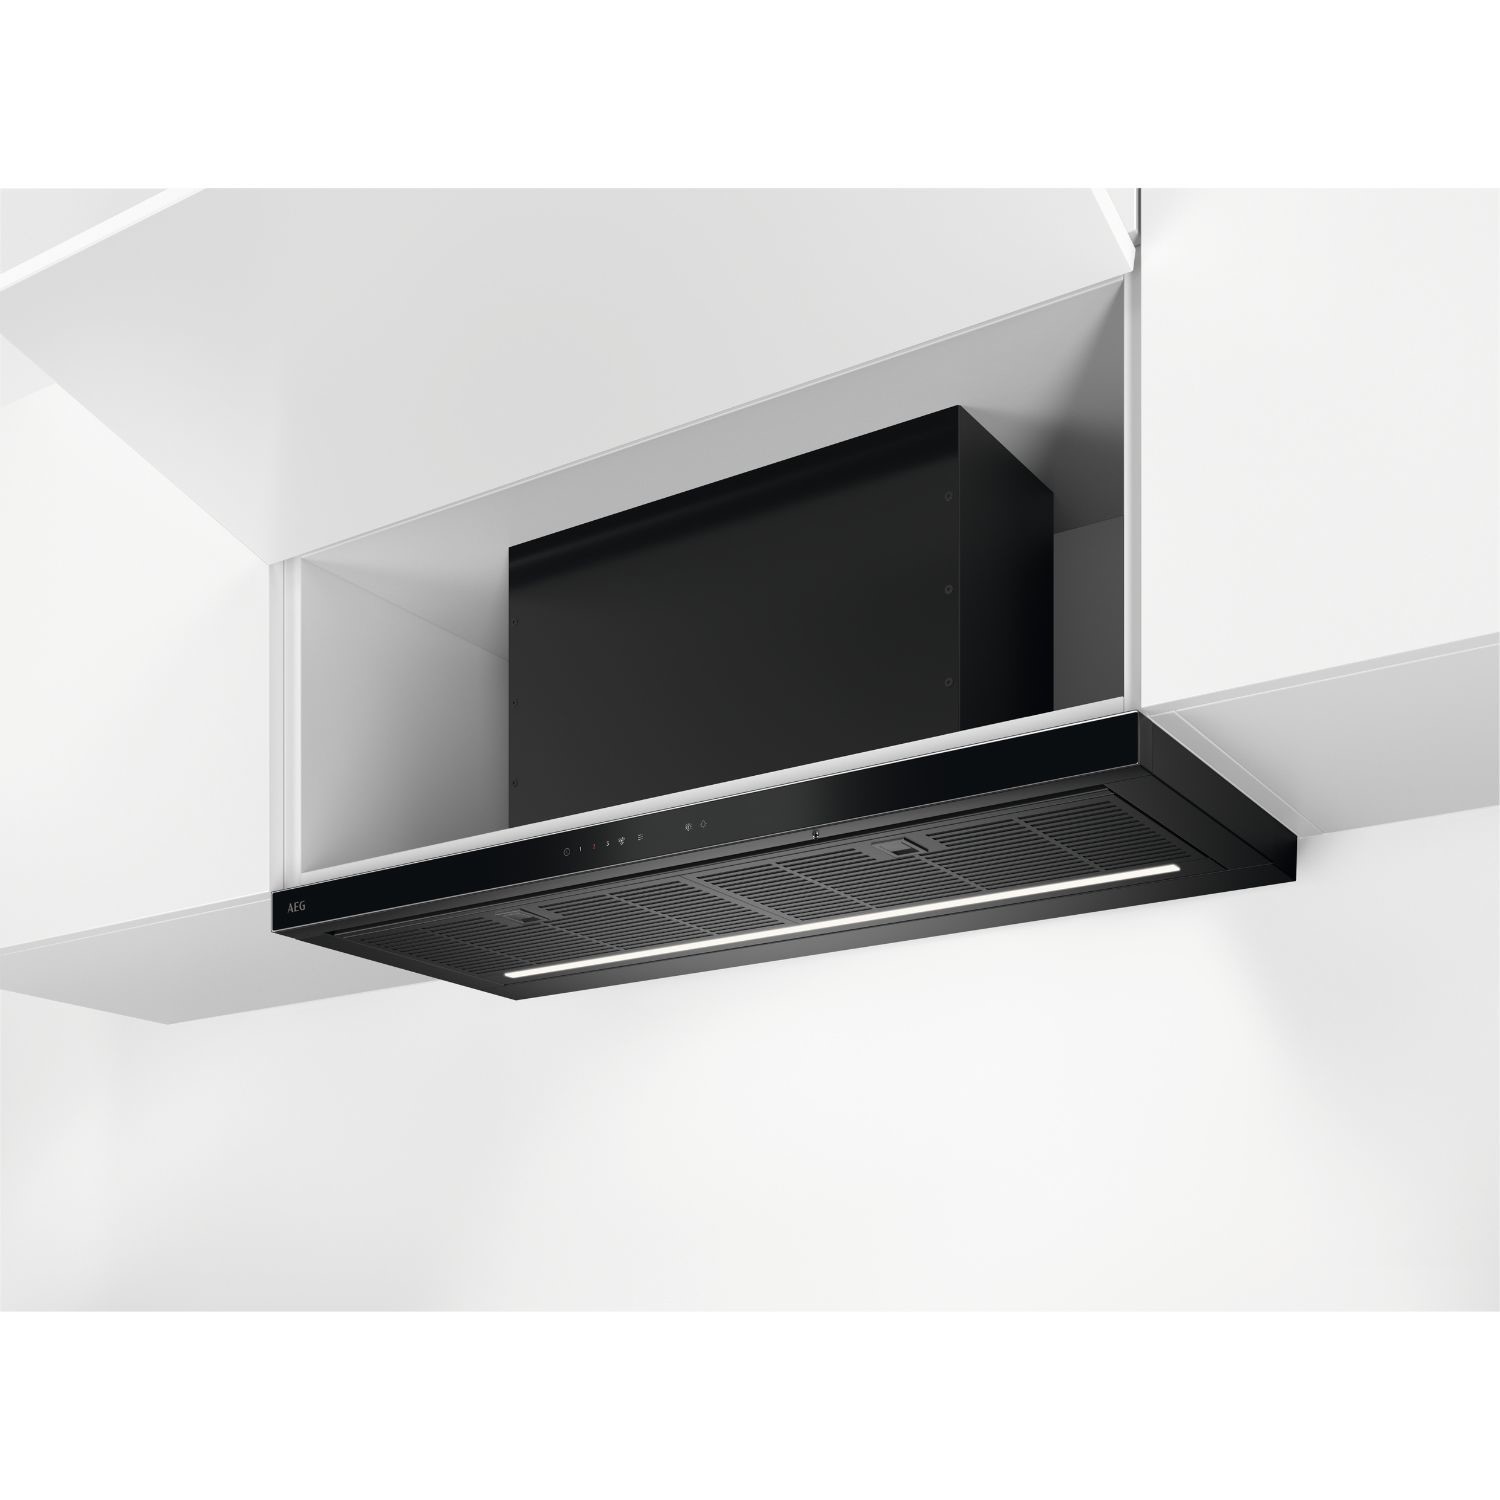 Photos - Other for Computer AEG 8000 Series 90cm Canopy Cooker Hood - Black GDP869PB 